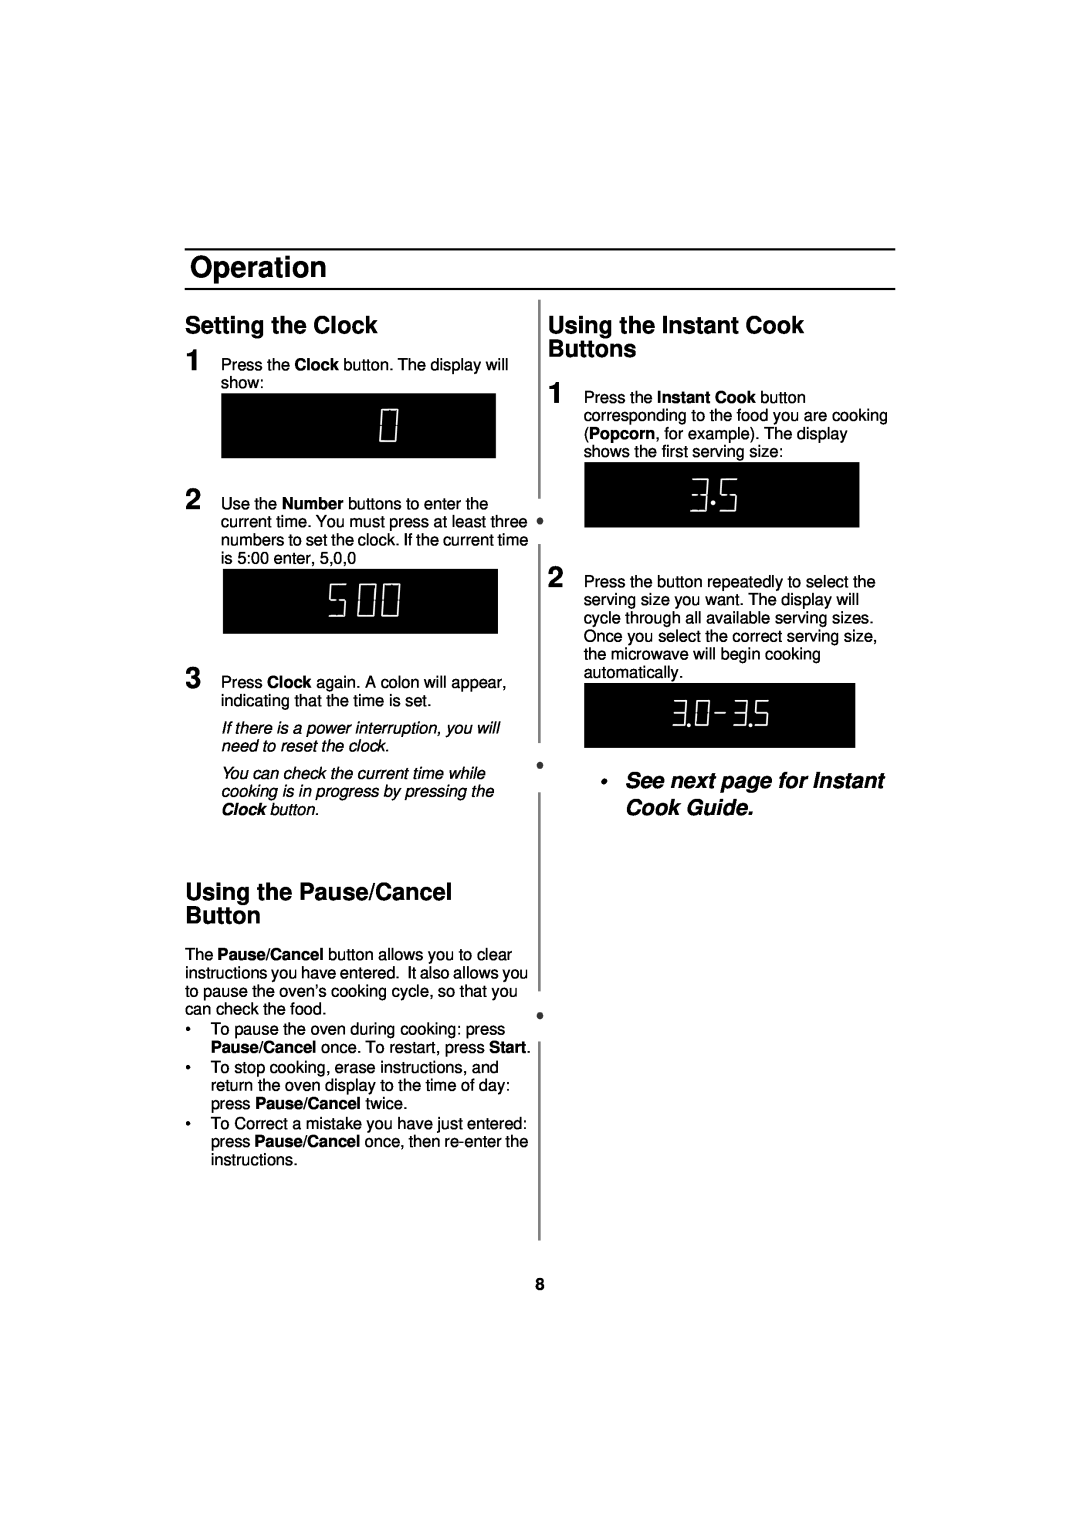 Samsung MW830WA owner manual Operation, Setting the Clock, Using the Pause/Cancel Button, Using the Instant Cook Buttons 